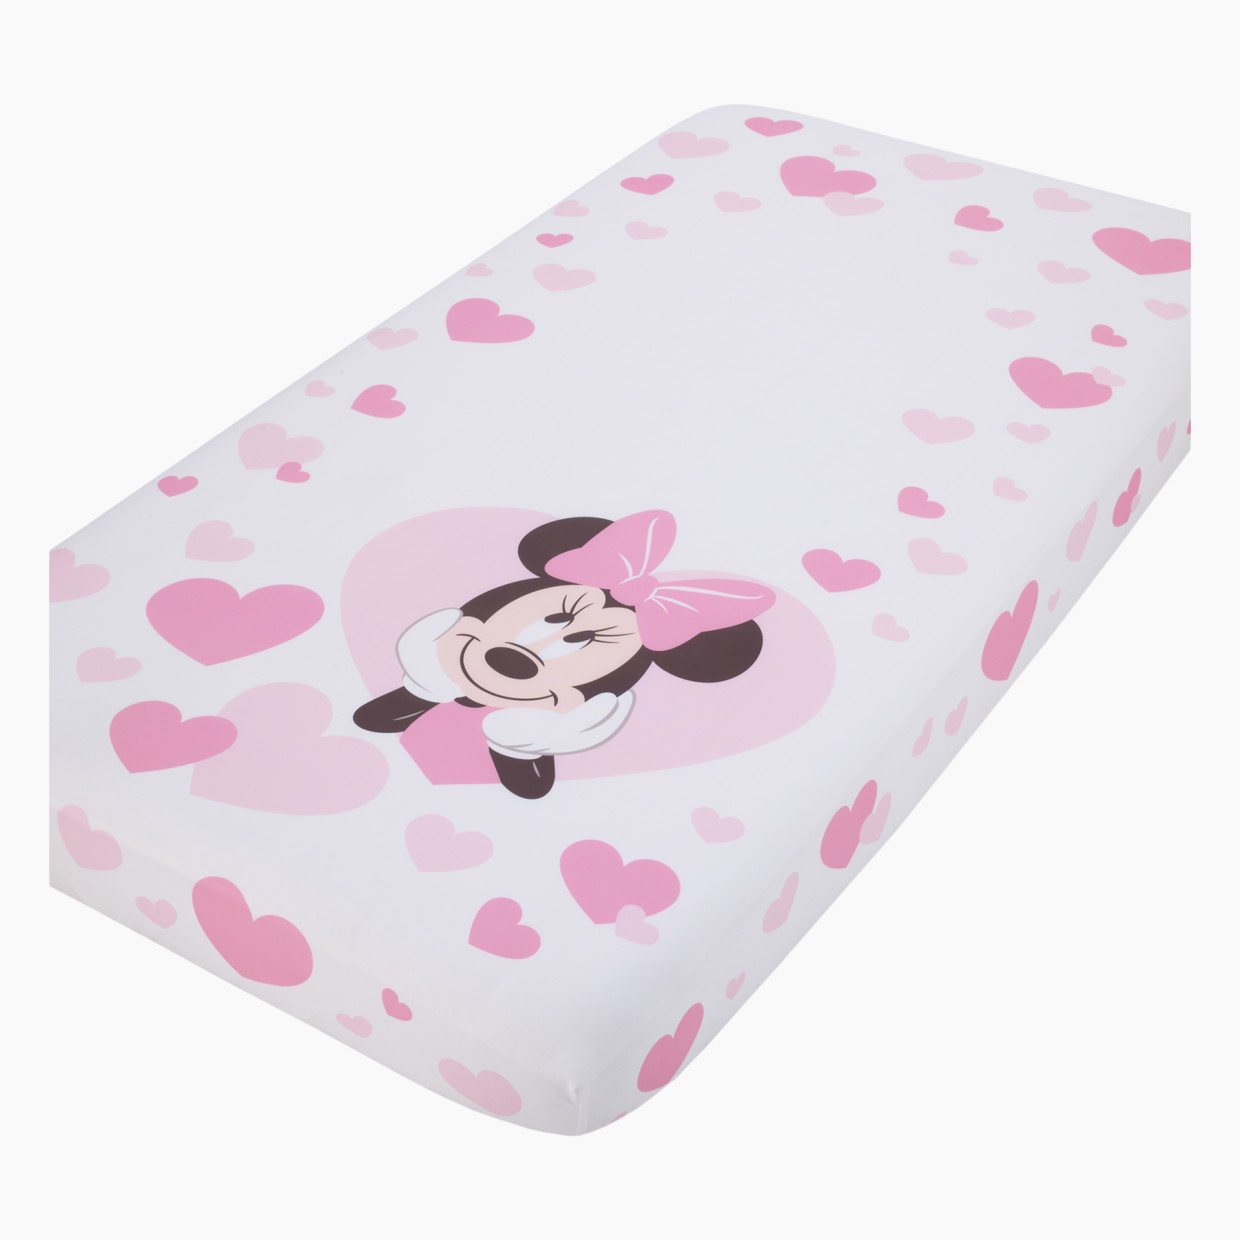 NoJo Baby Photo Op Fitted Crib Sheet - Minnie Mouse.